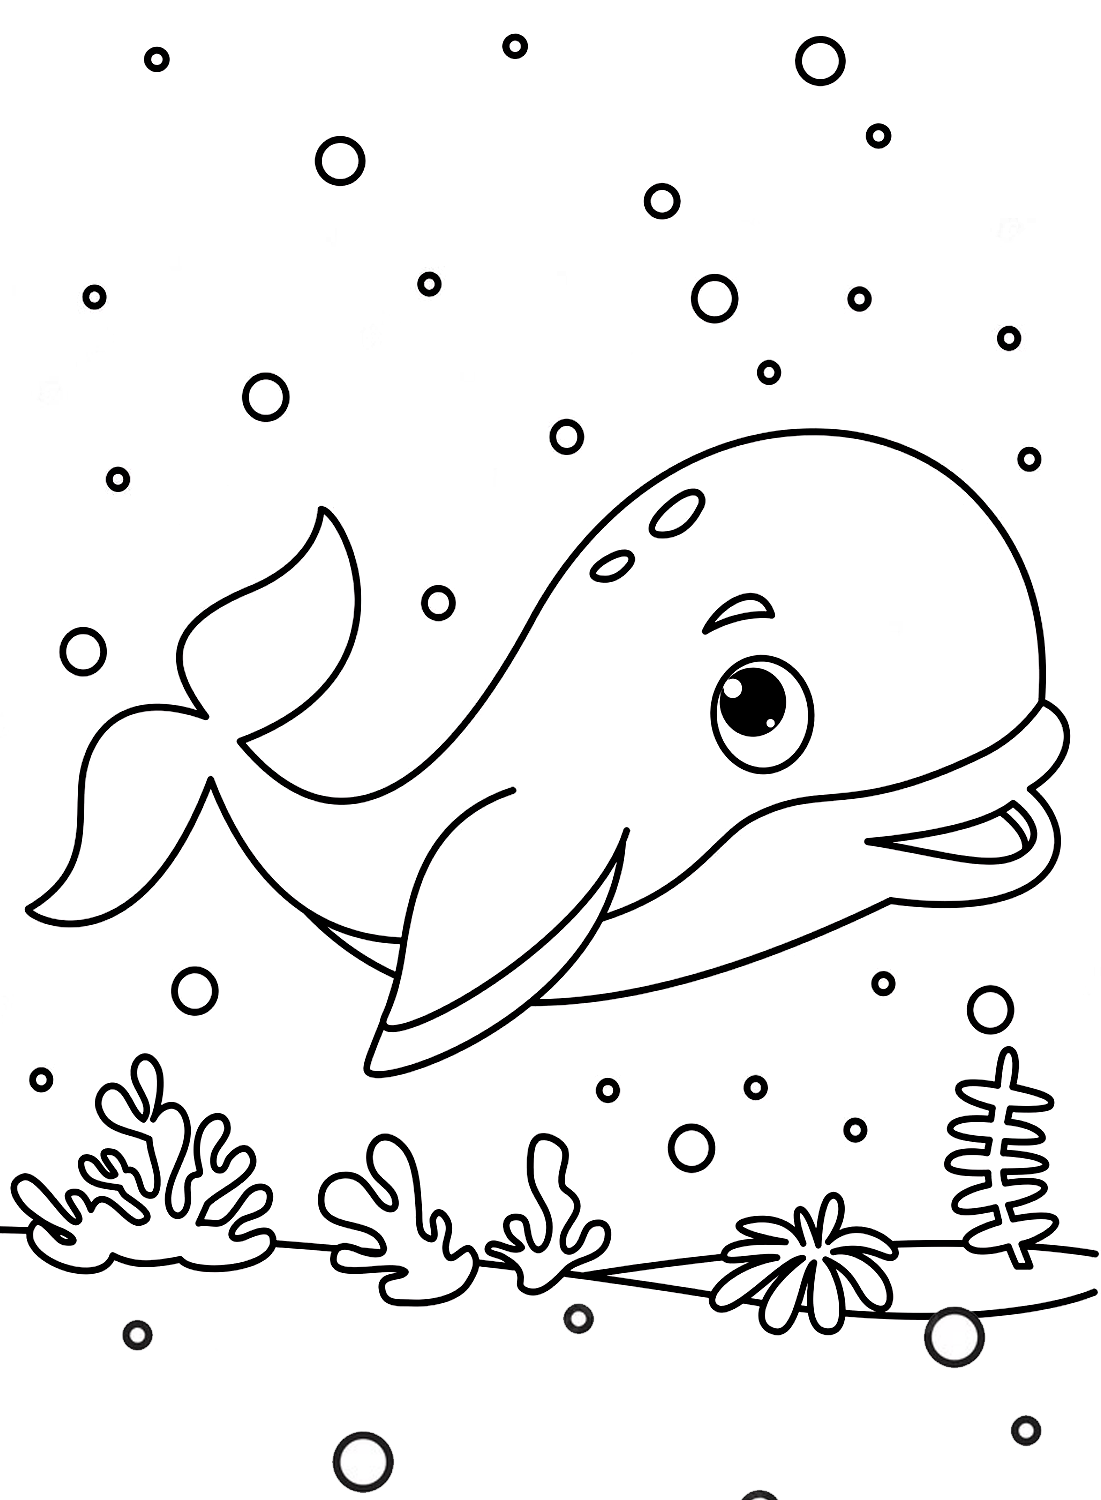 Whale pictures to color